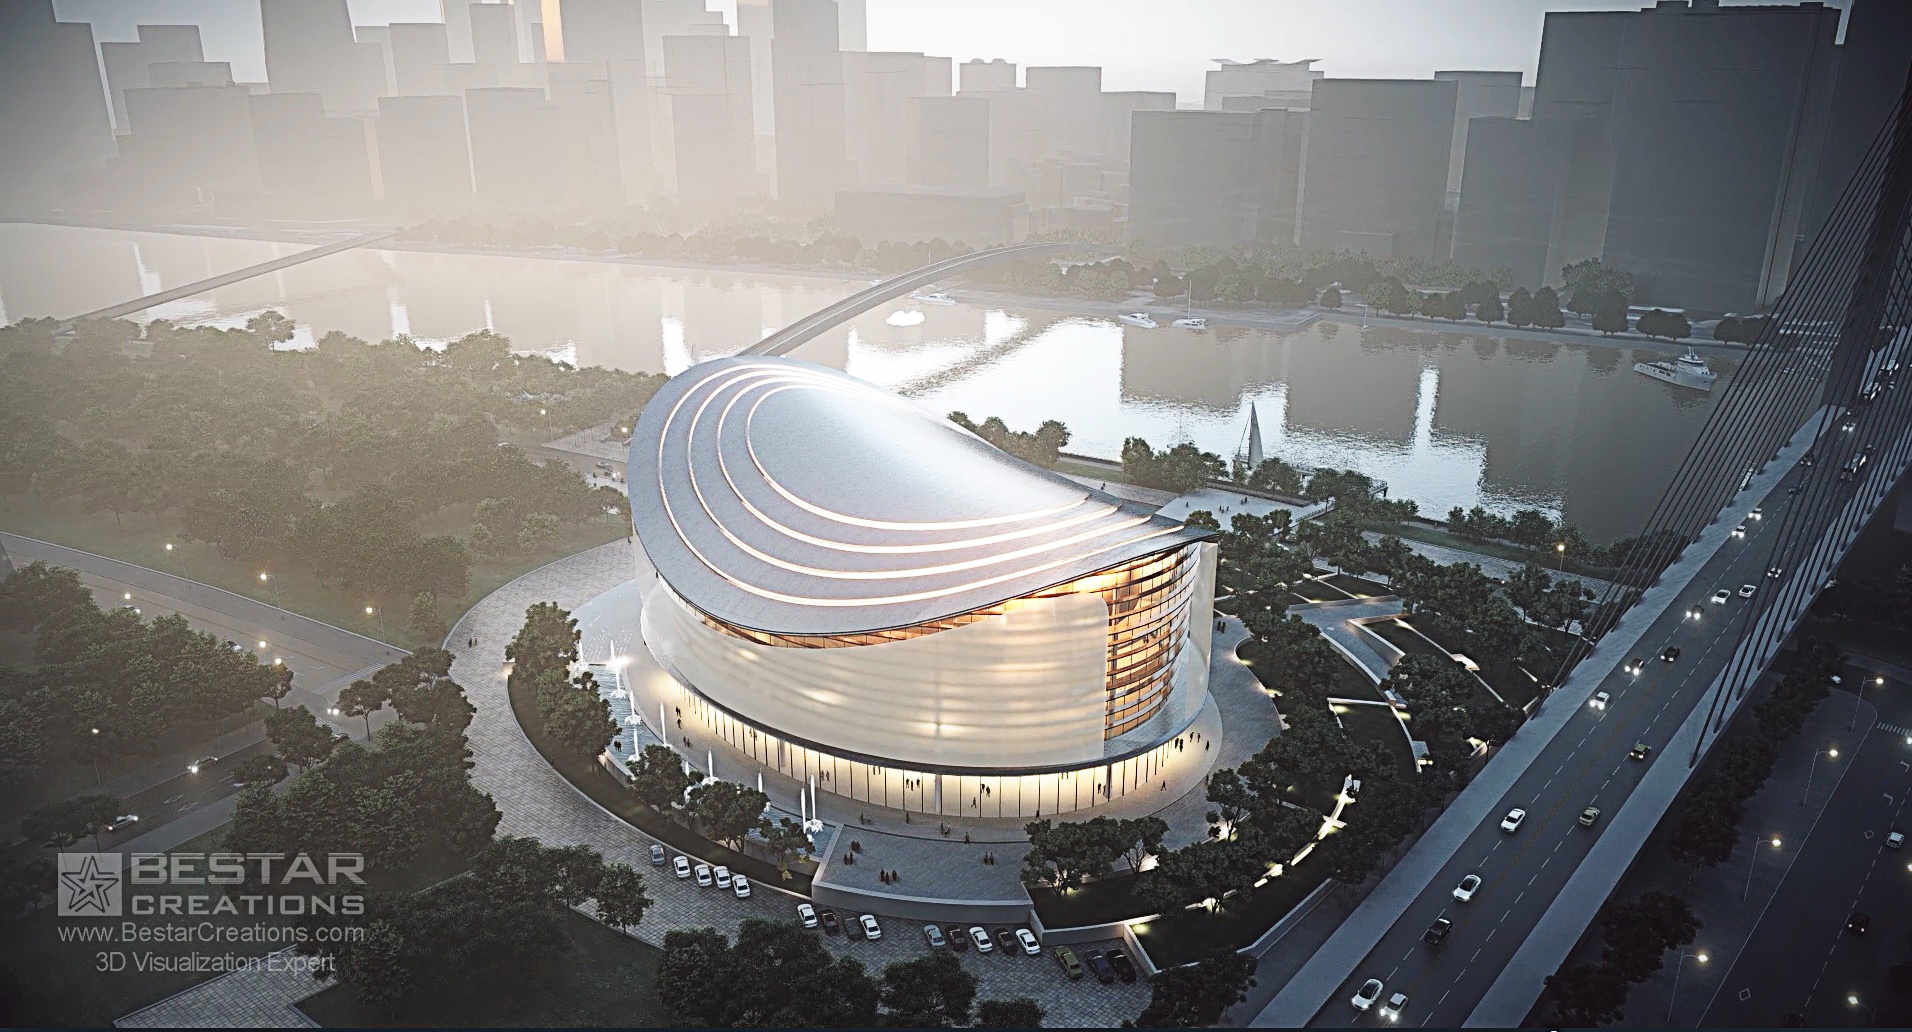 BestarCreations completed the Saigo Opera House project in Vietnam